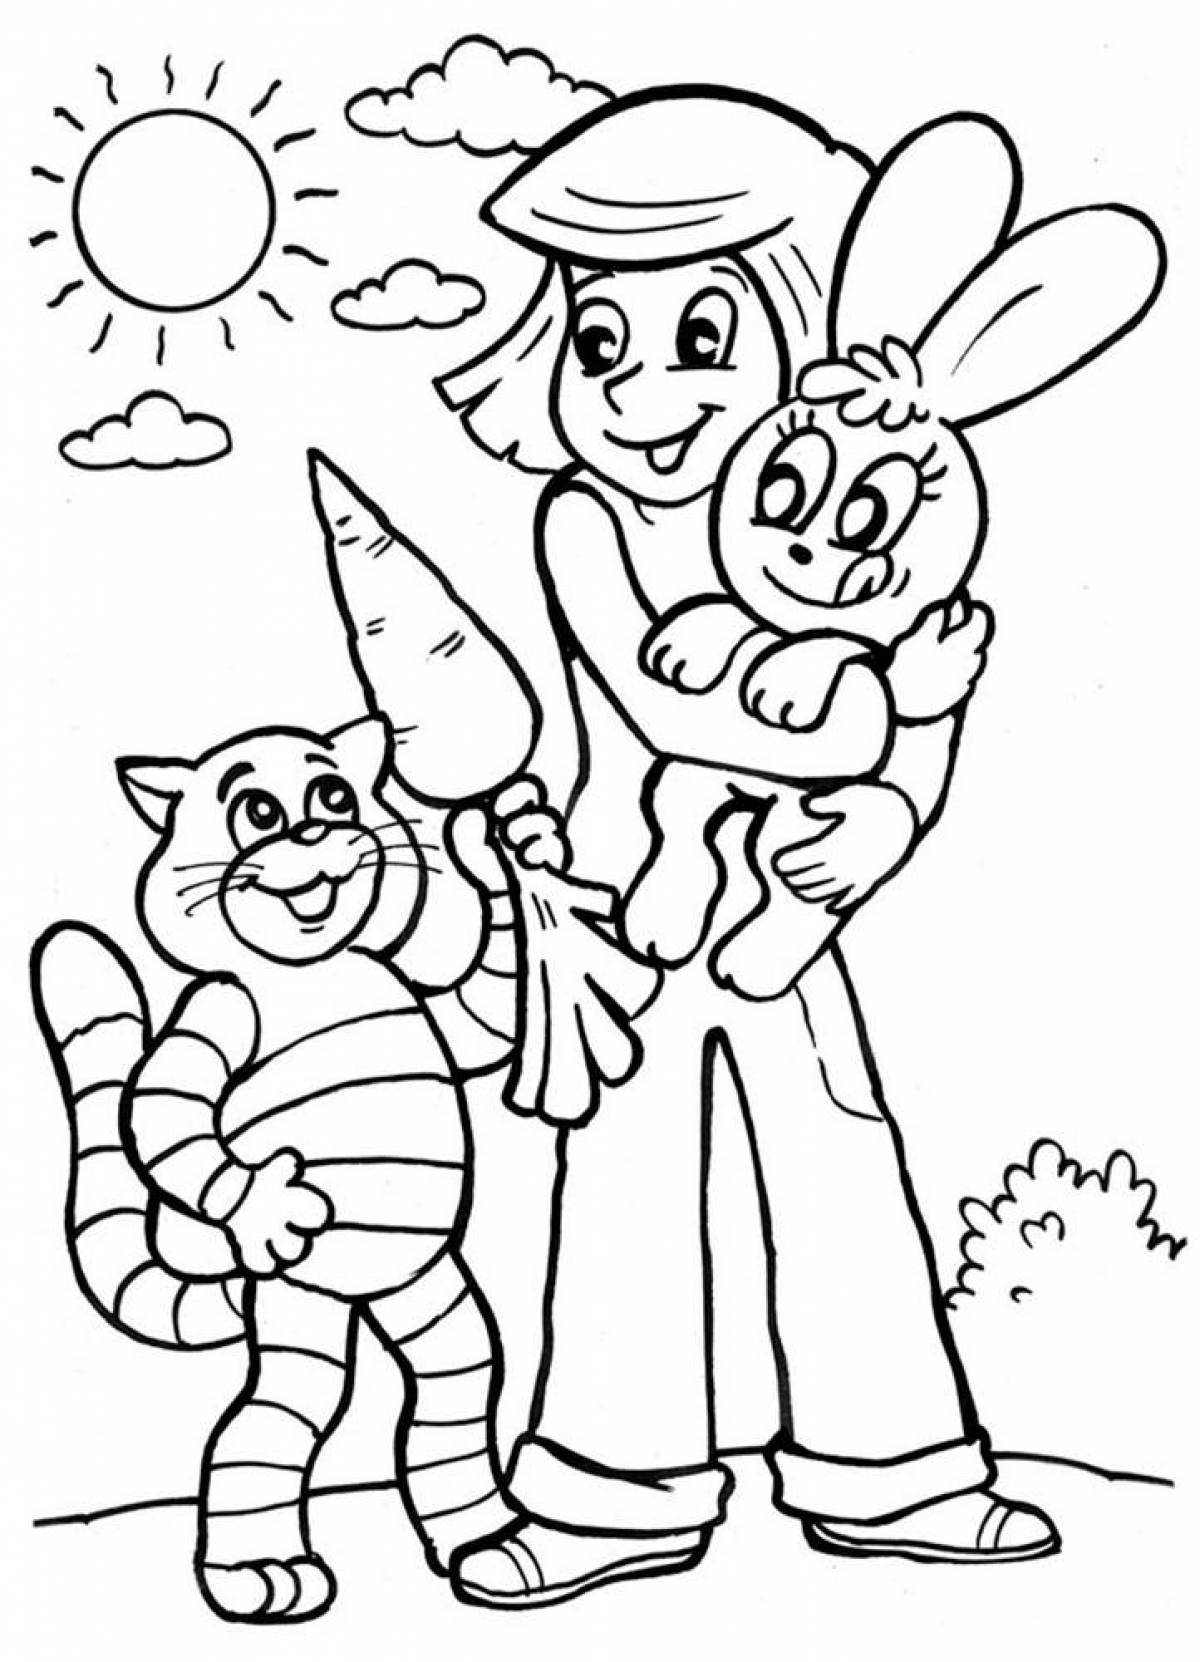 Fun buttermilk coloring book for toddlers